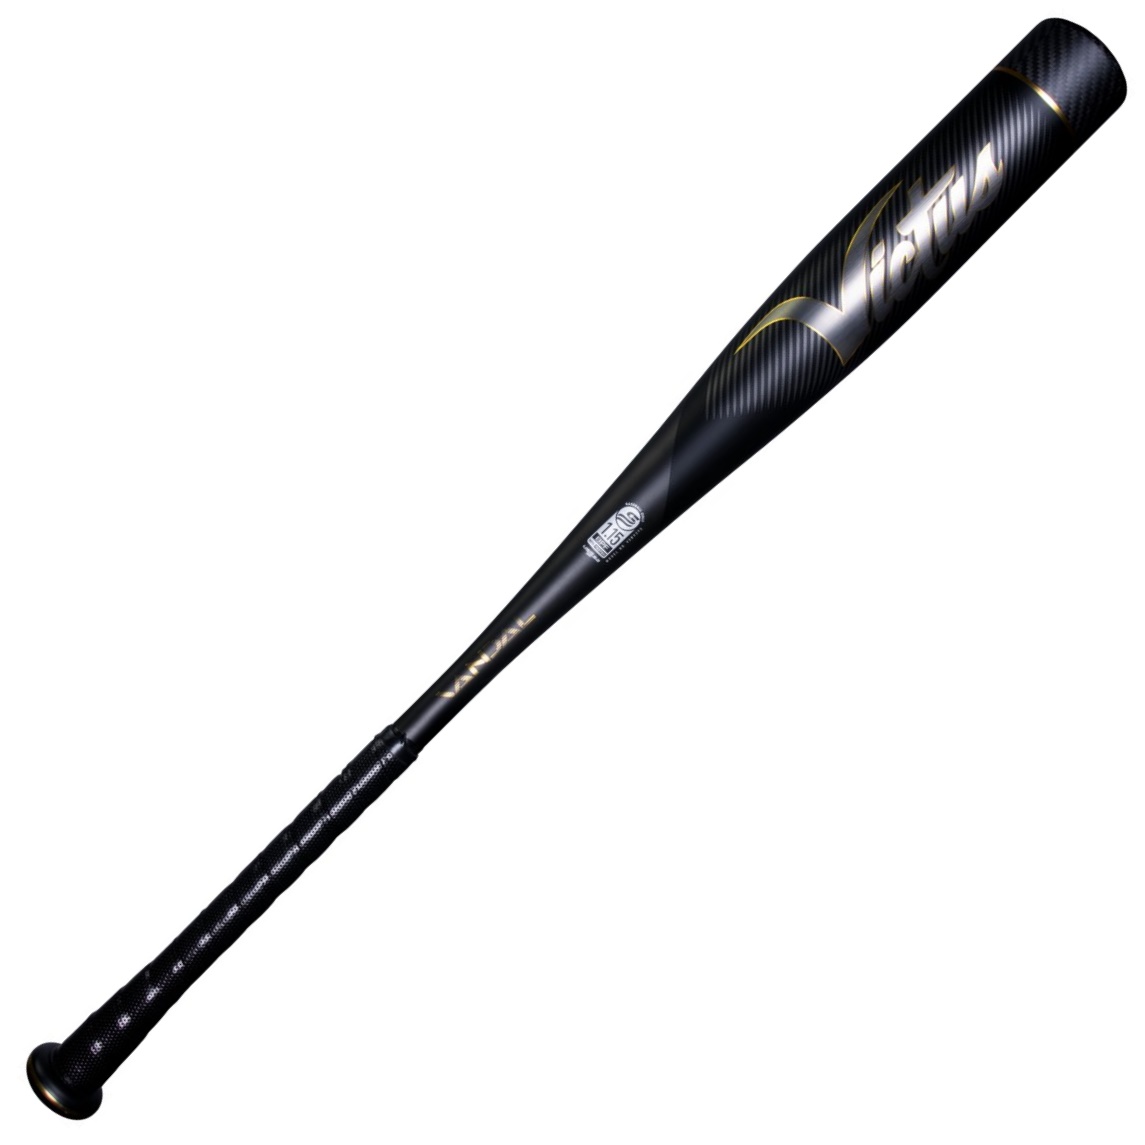 victus-vandal-2-bbcor-2022-baseball-bat-33-inch-30-oz VCBV2-3330 Victus 840078703614 In baseball speed is everything. That’s why Victus designed the Vandal using